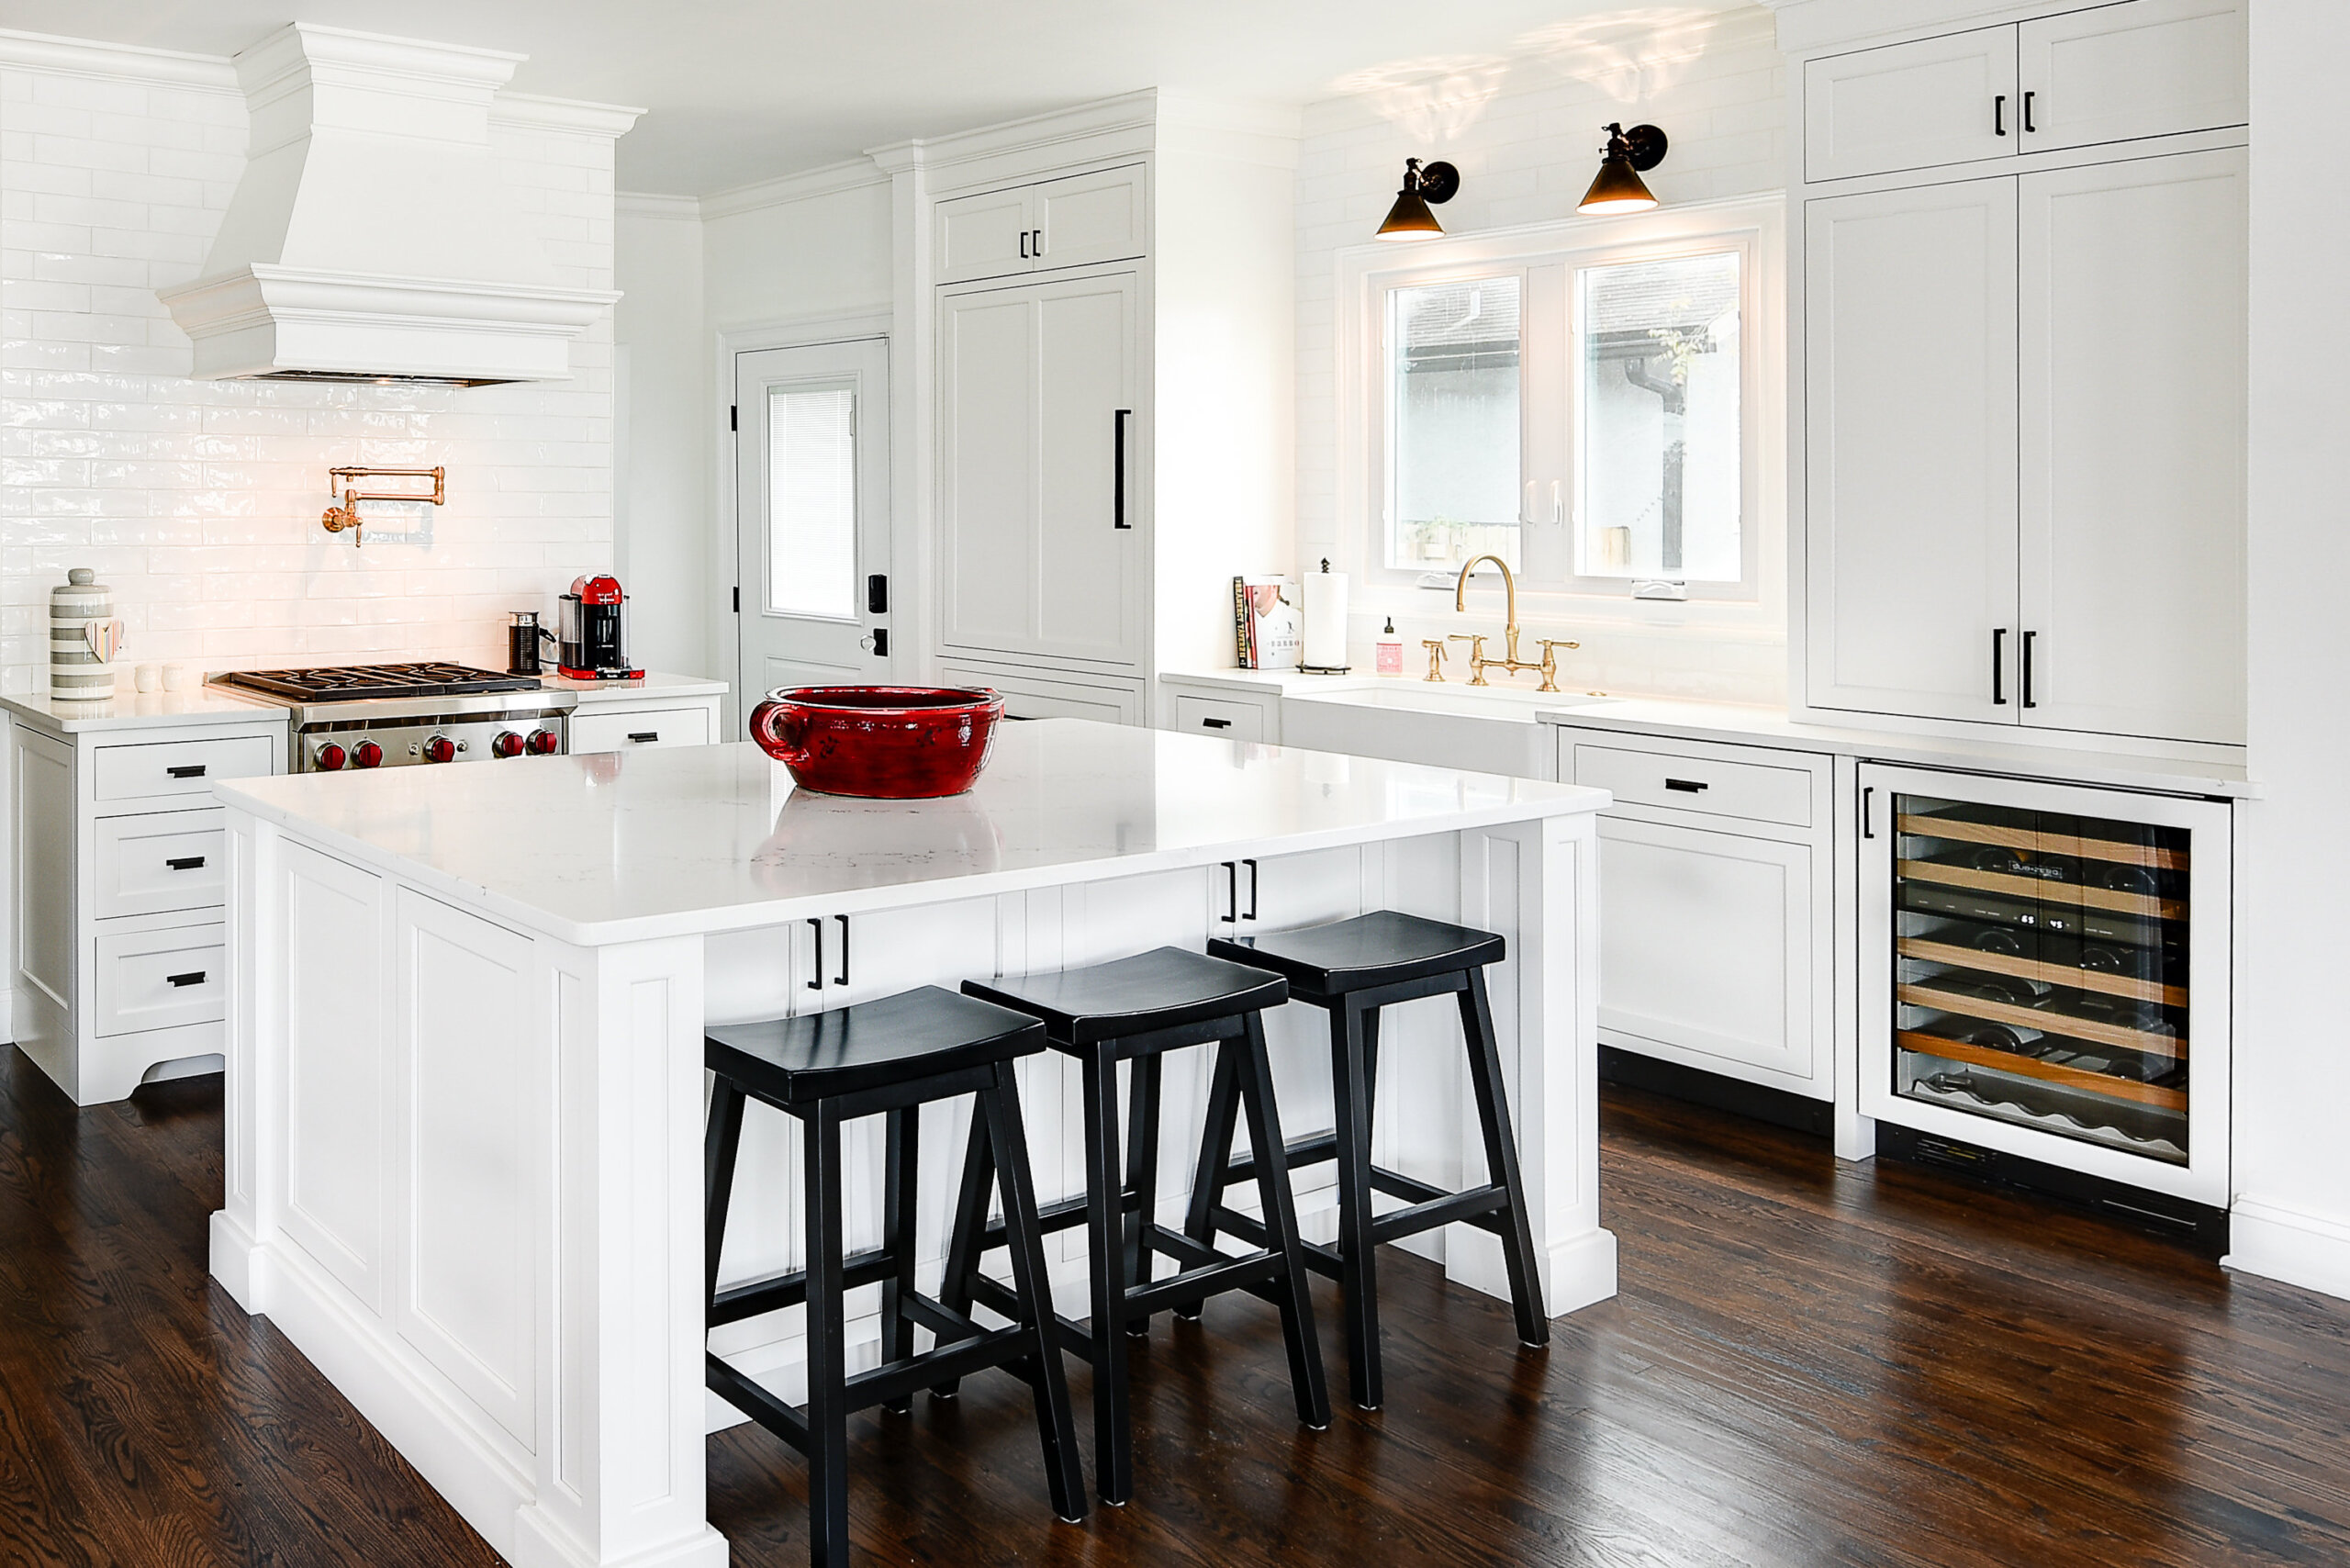 A bright white kitchen with a large kitchen island and wood hood.